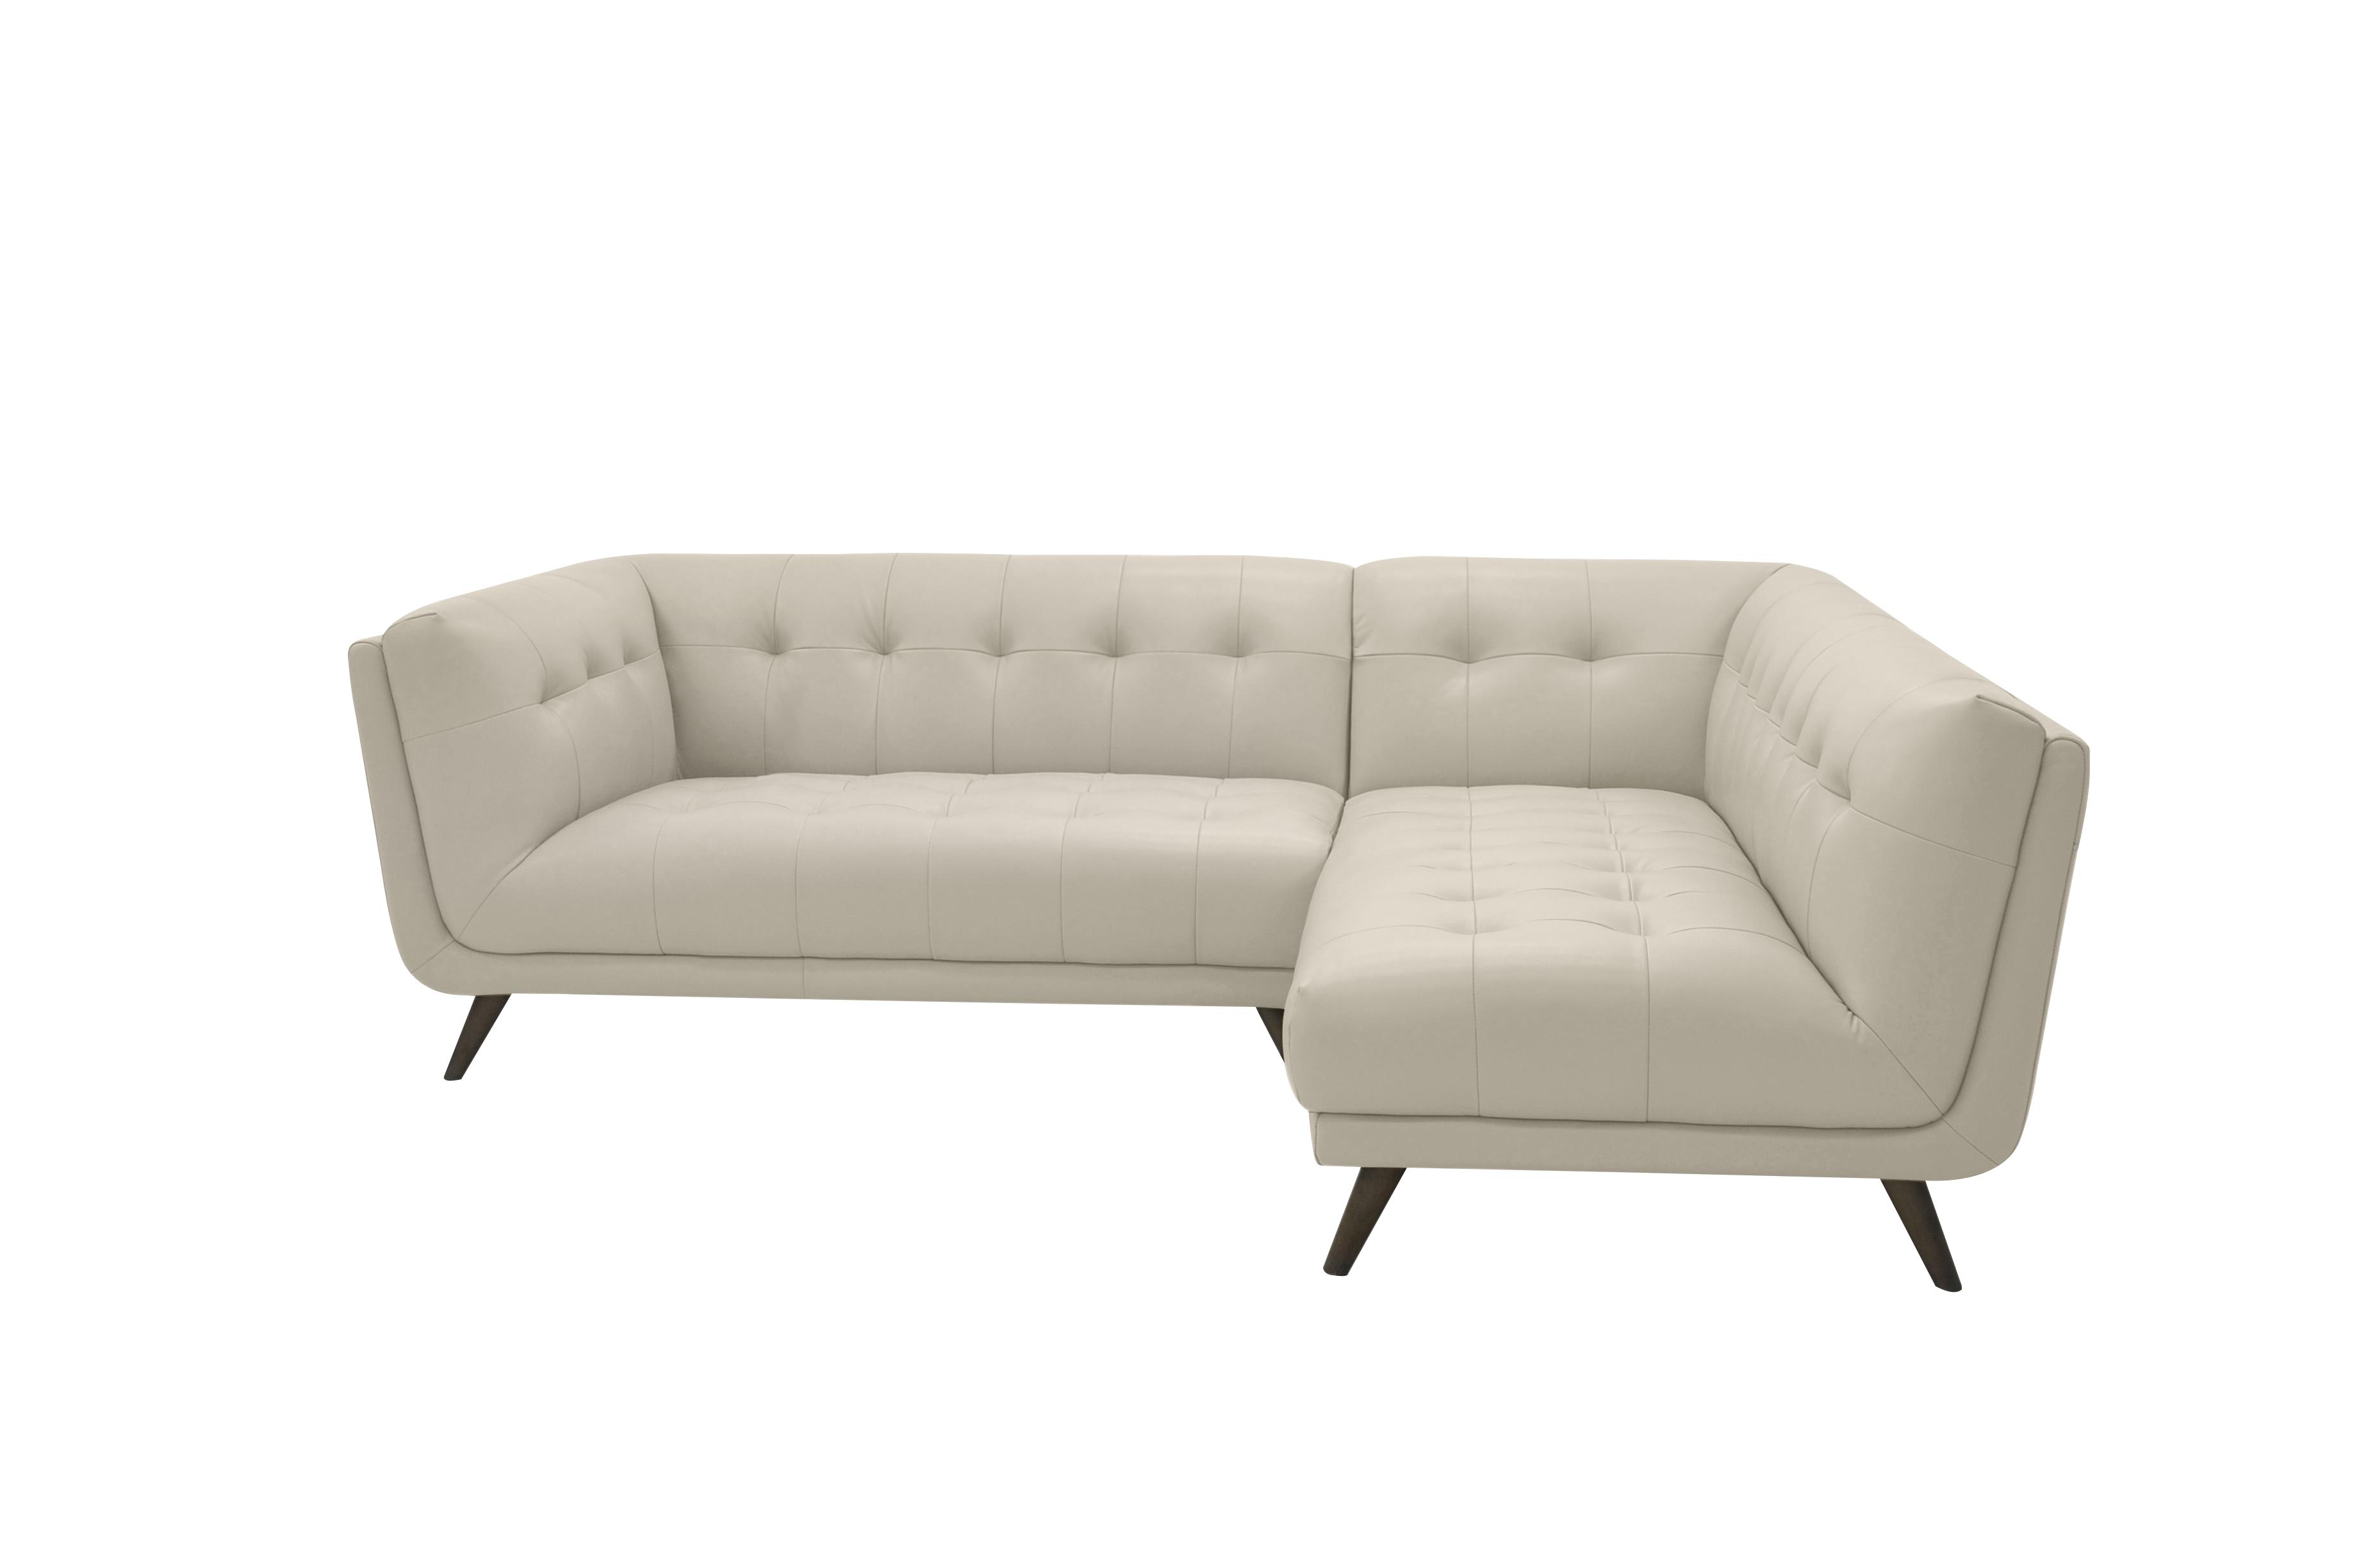 Rene Leather Chaise End Corner Sofa in Florida Lead Grey on Furniture Village